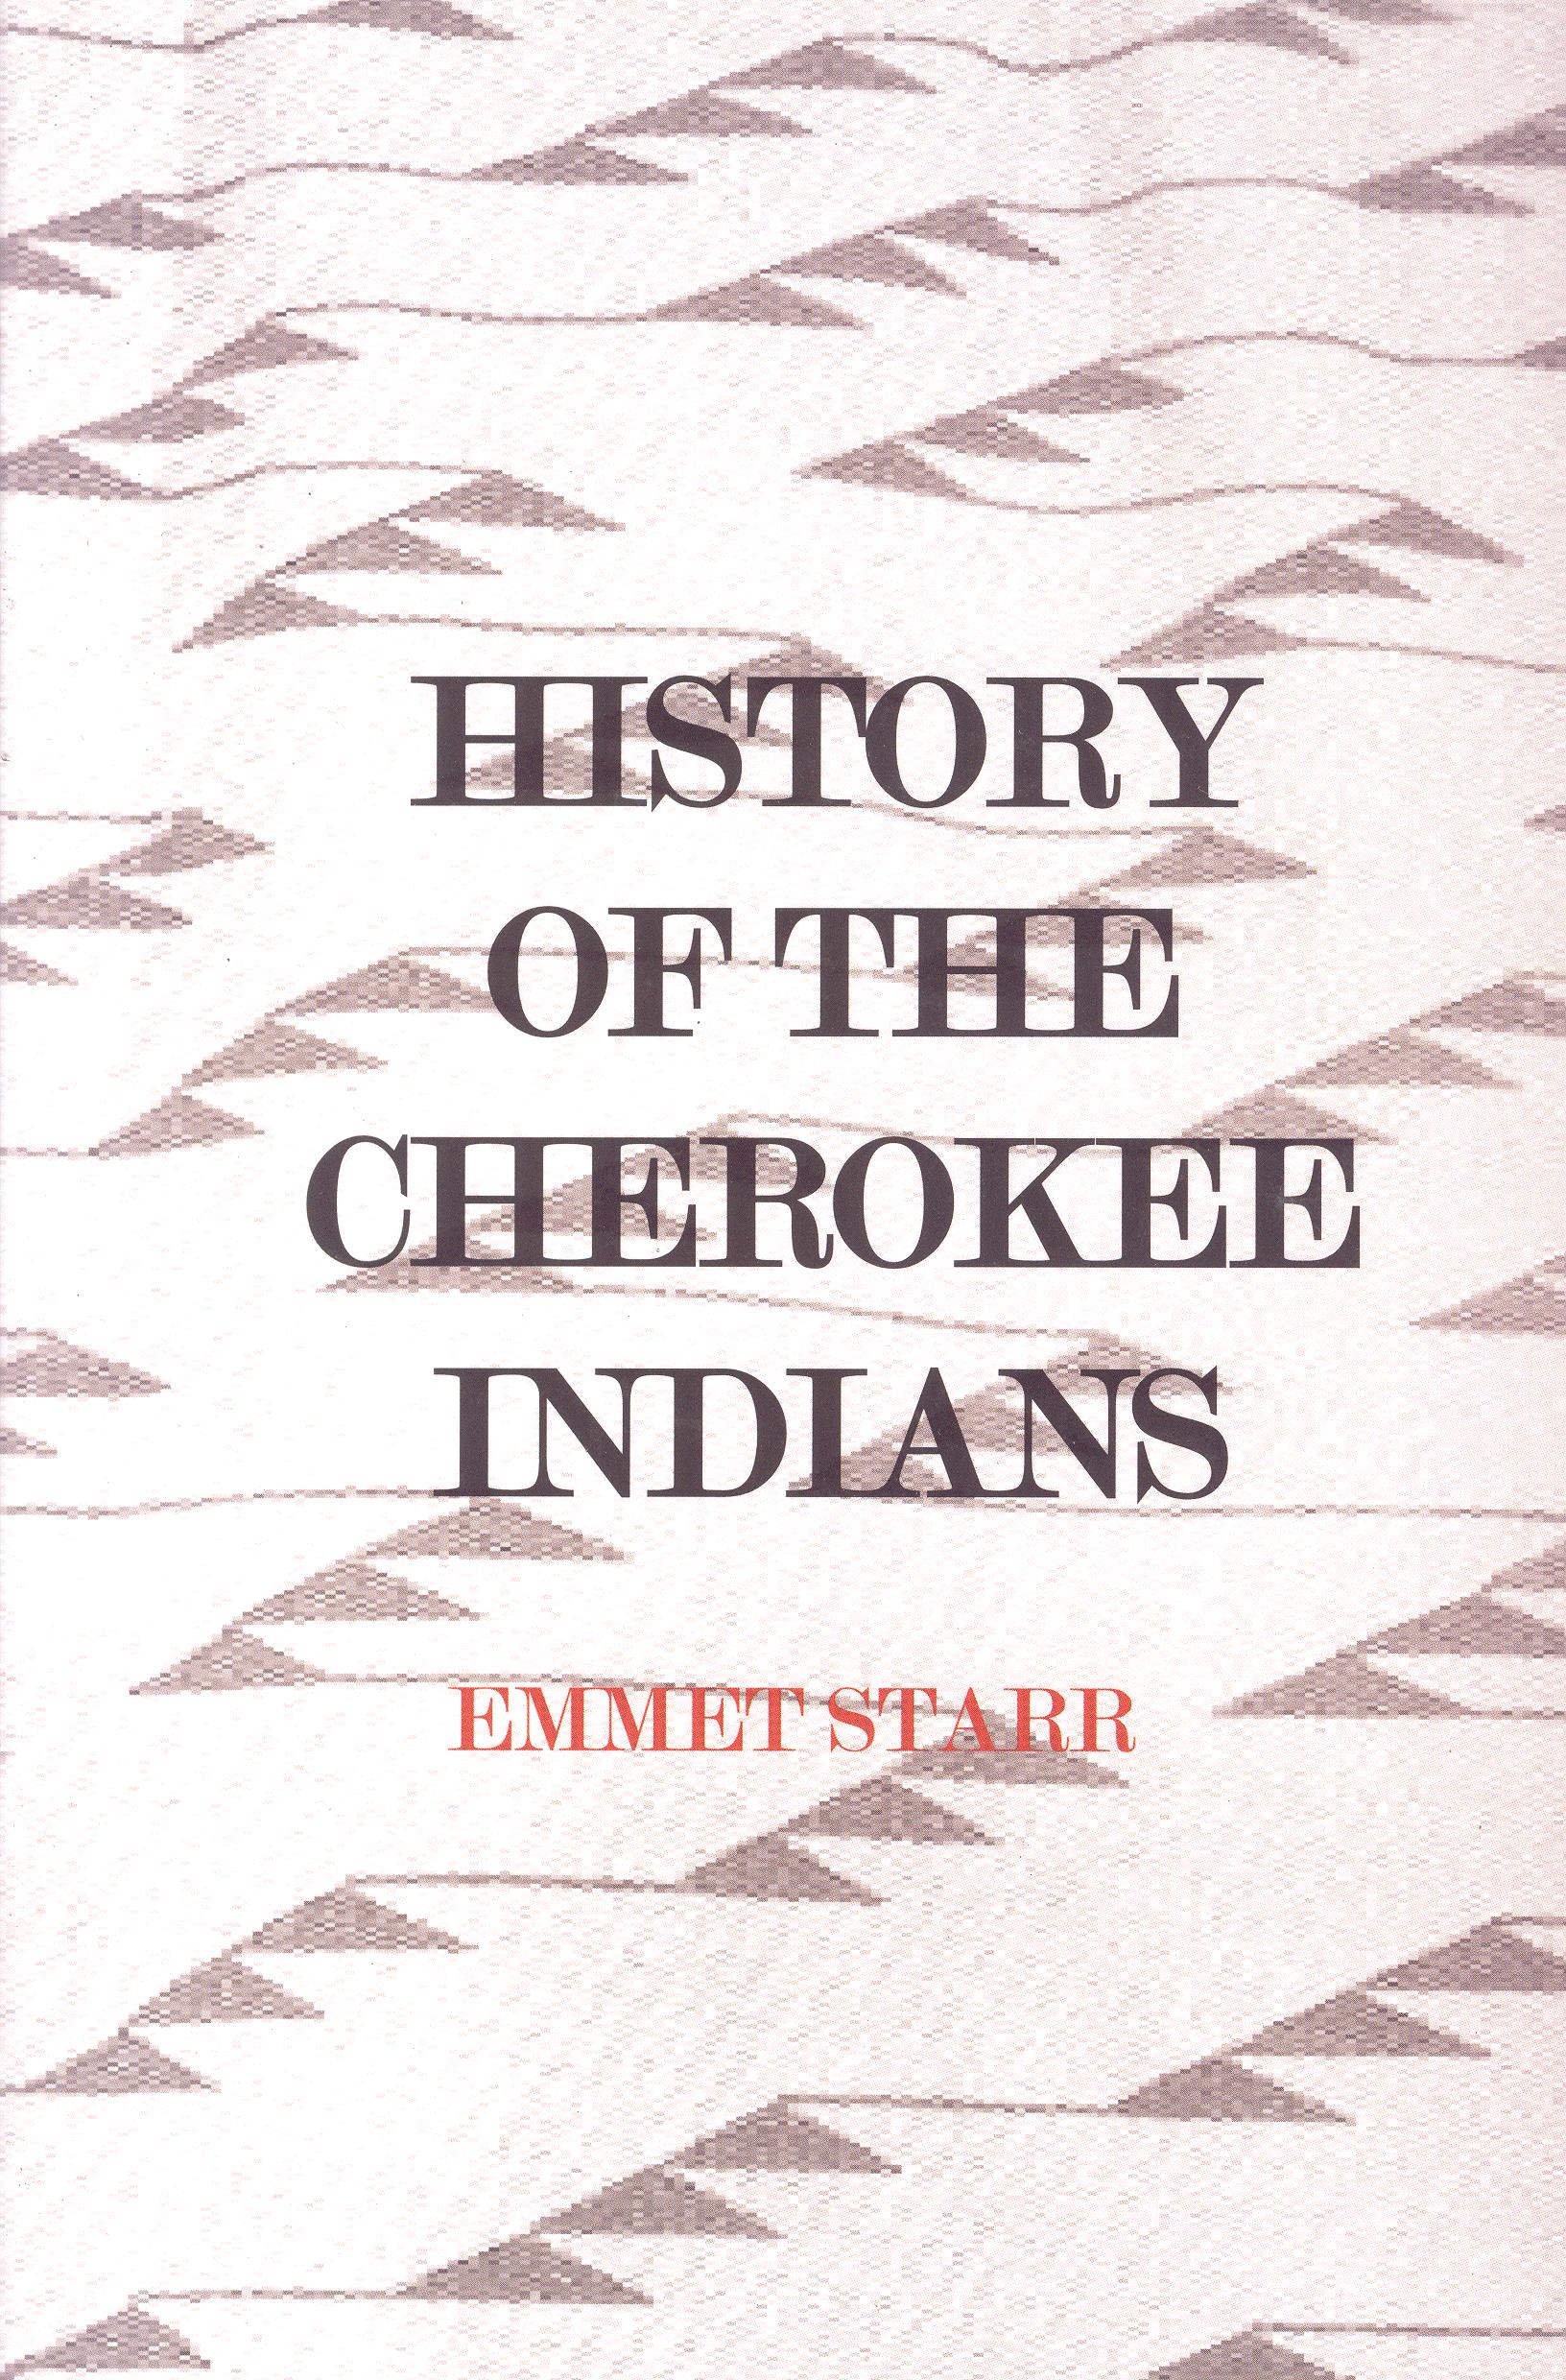 HISTORY OF THE CHEROKEE INDIAN